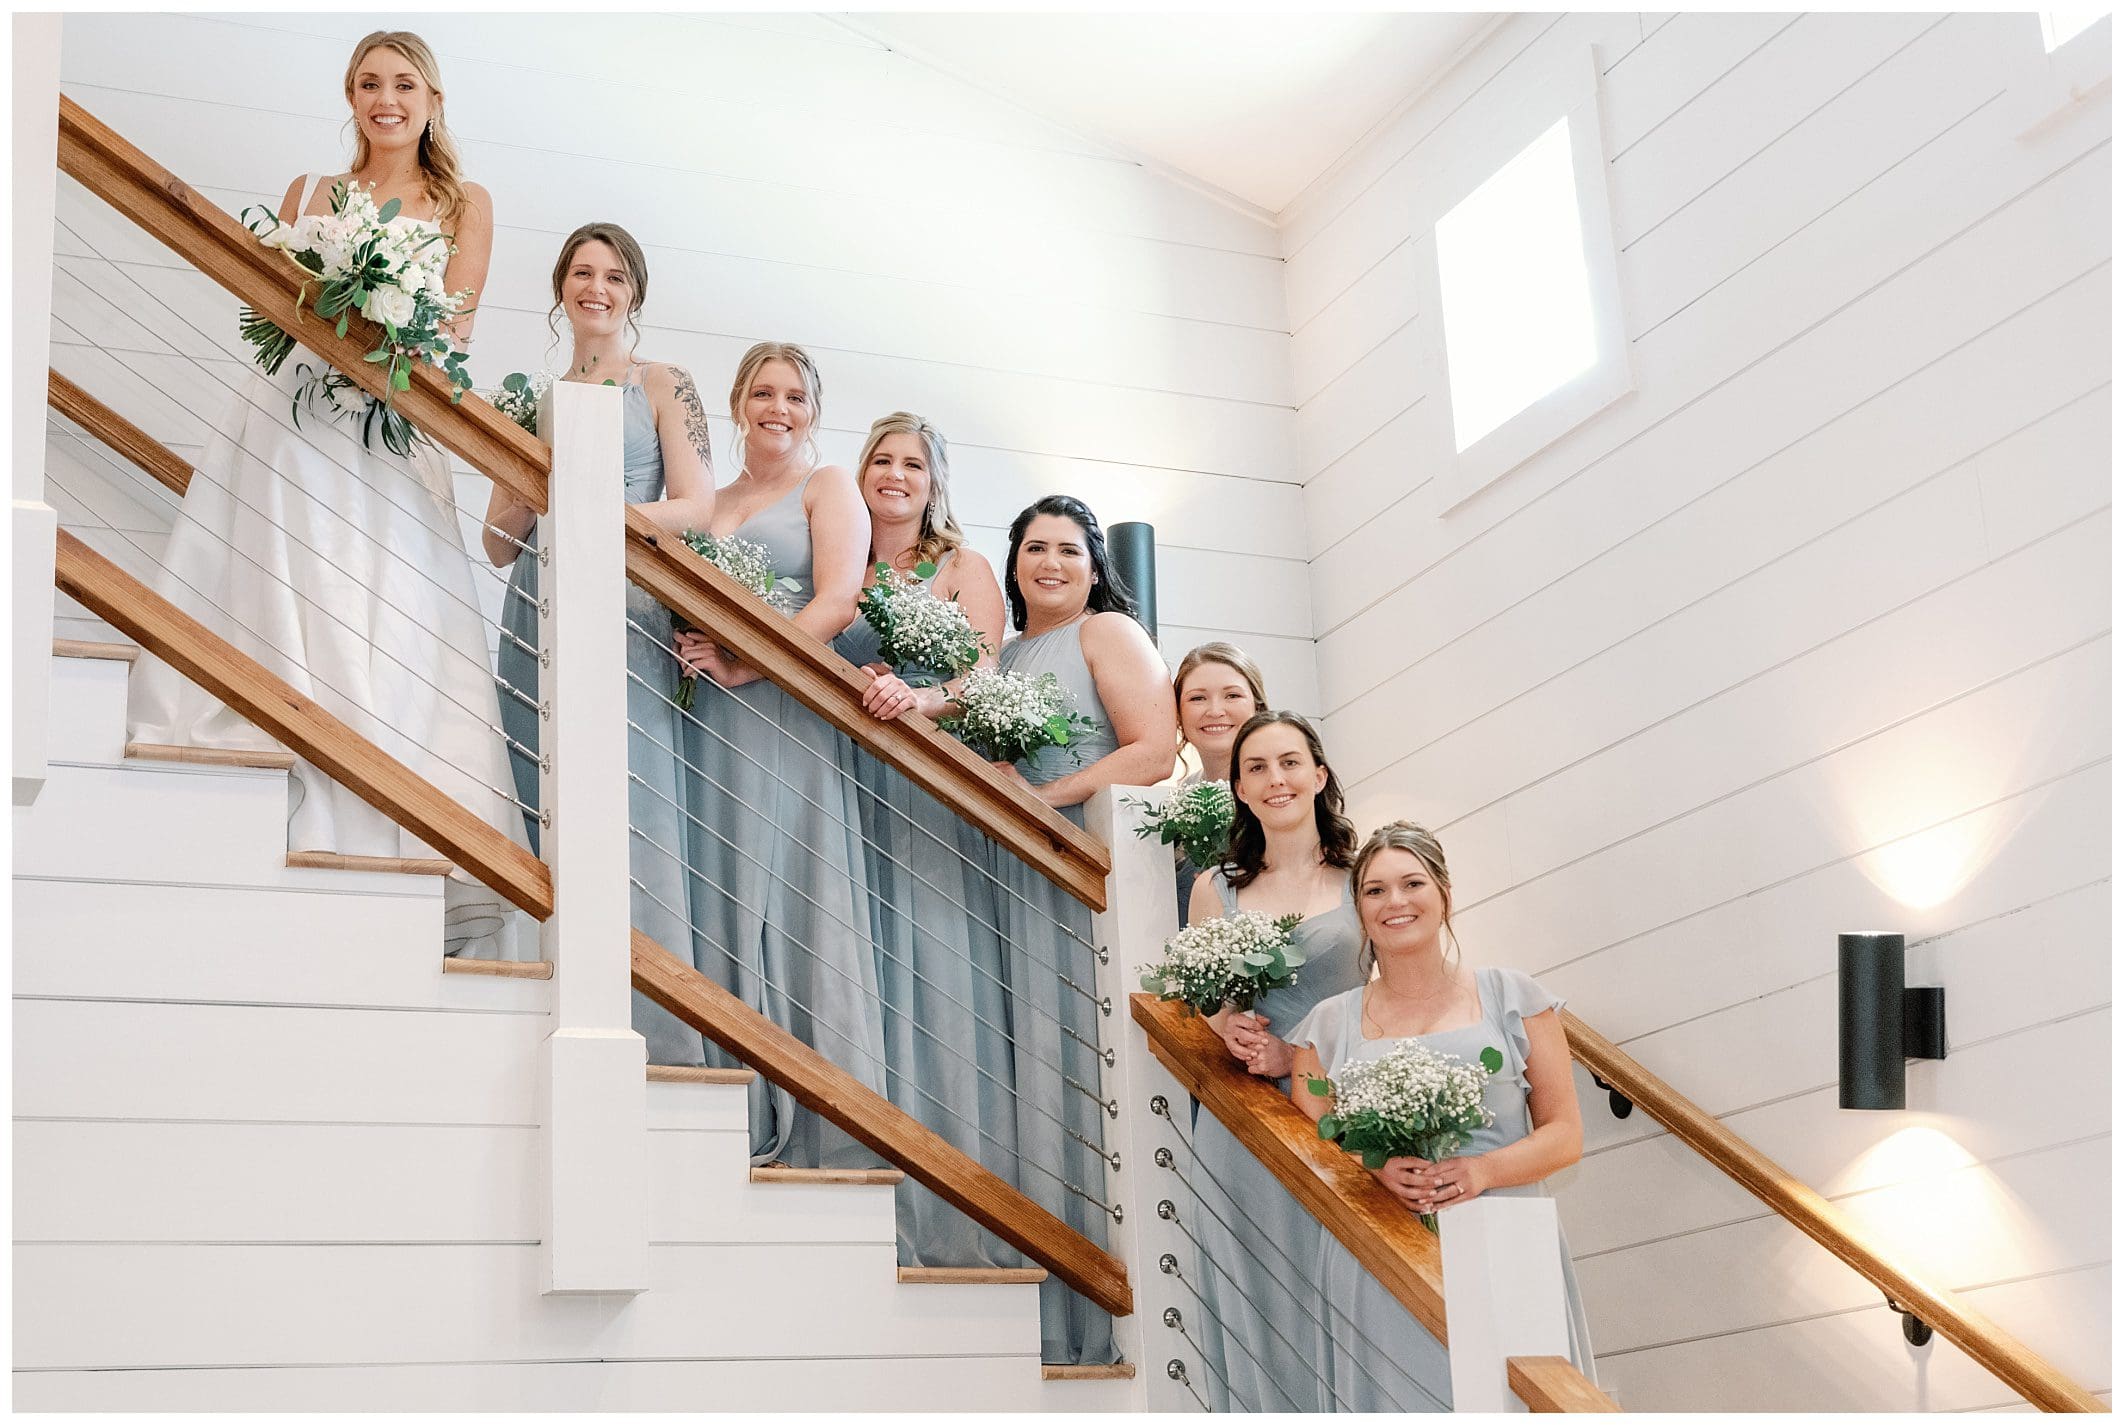 A bride and her bridesmaids pose on the stairs.